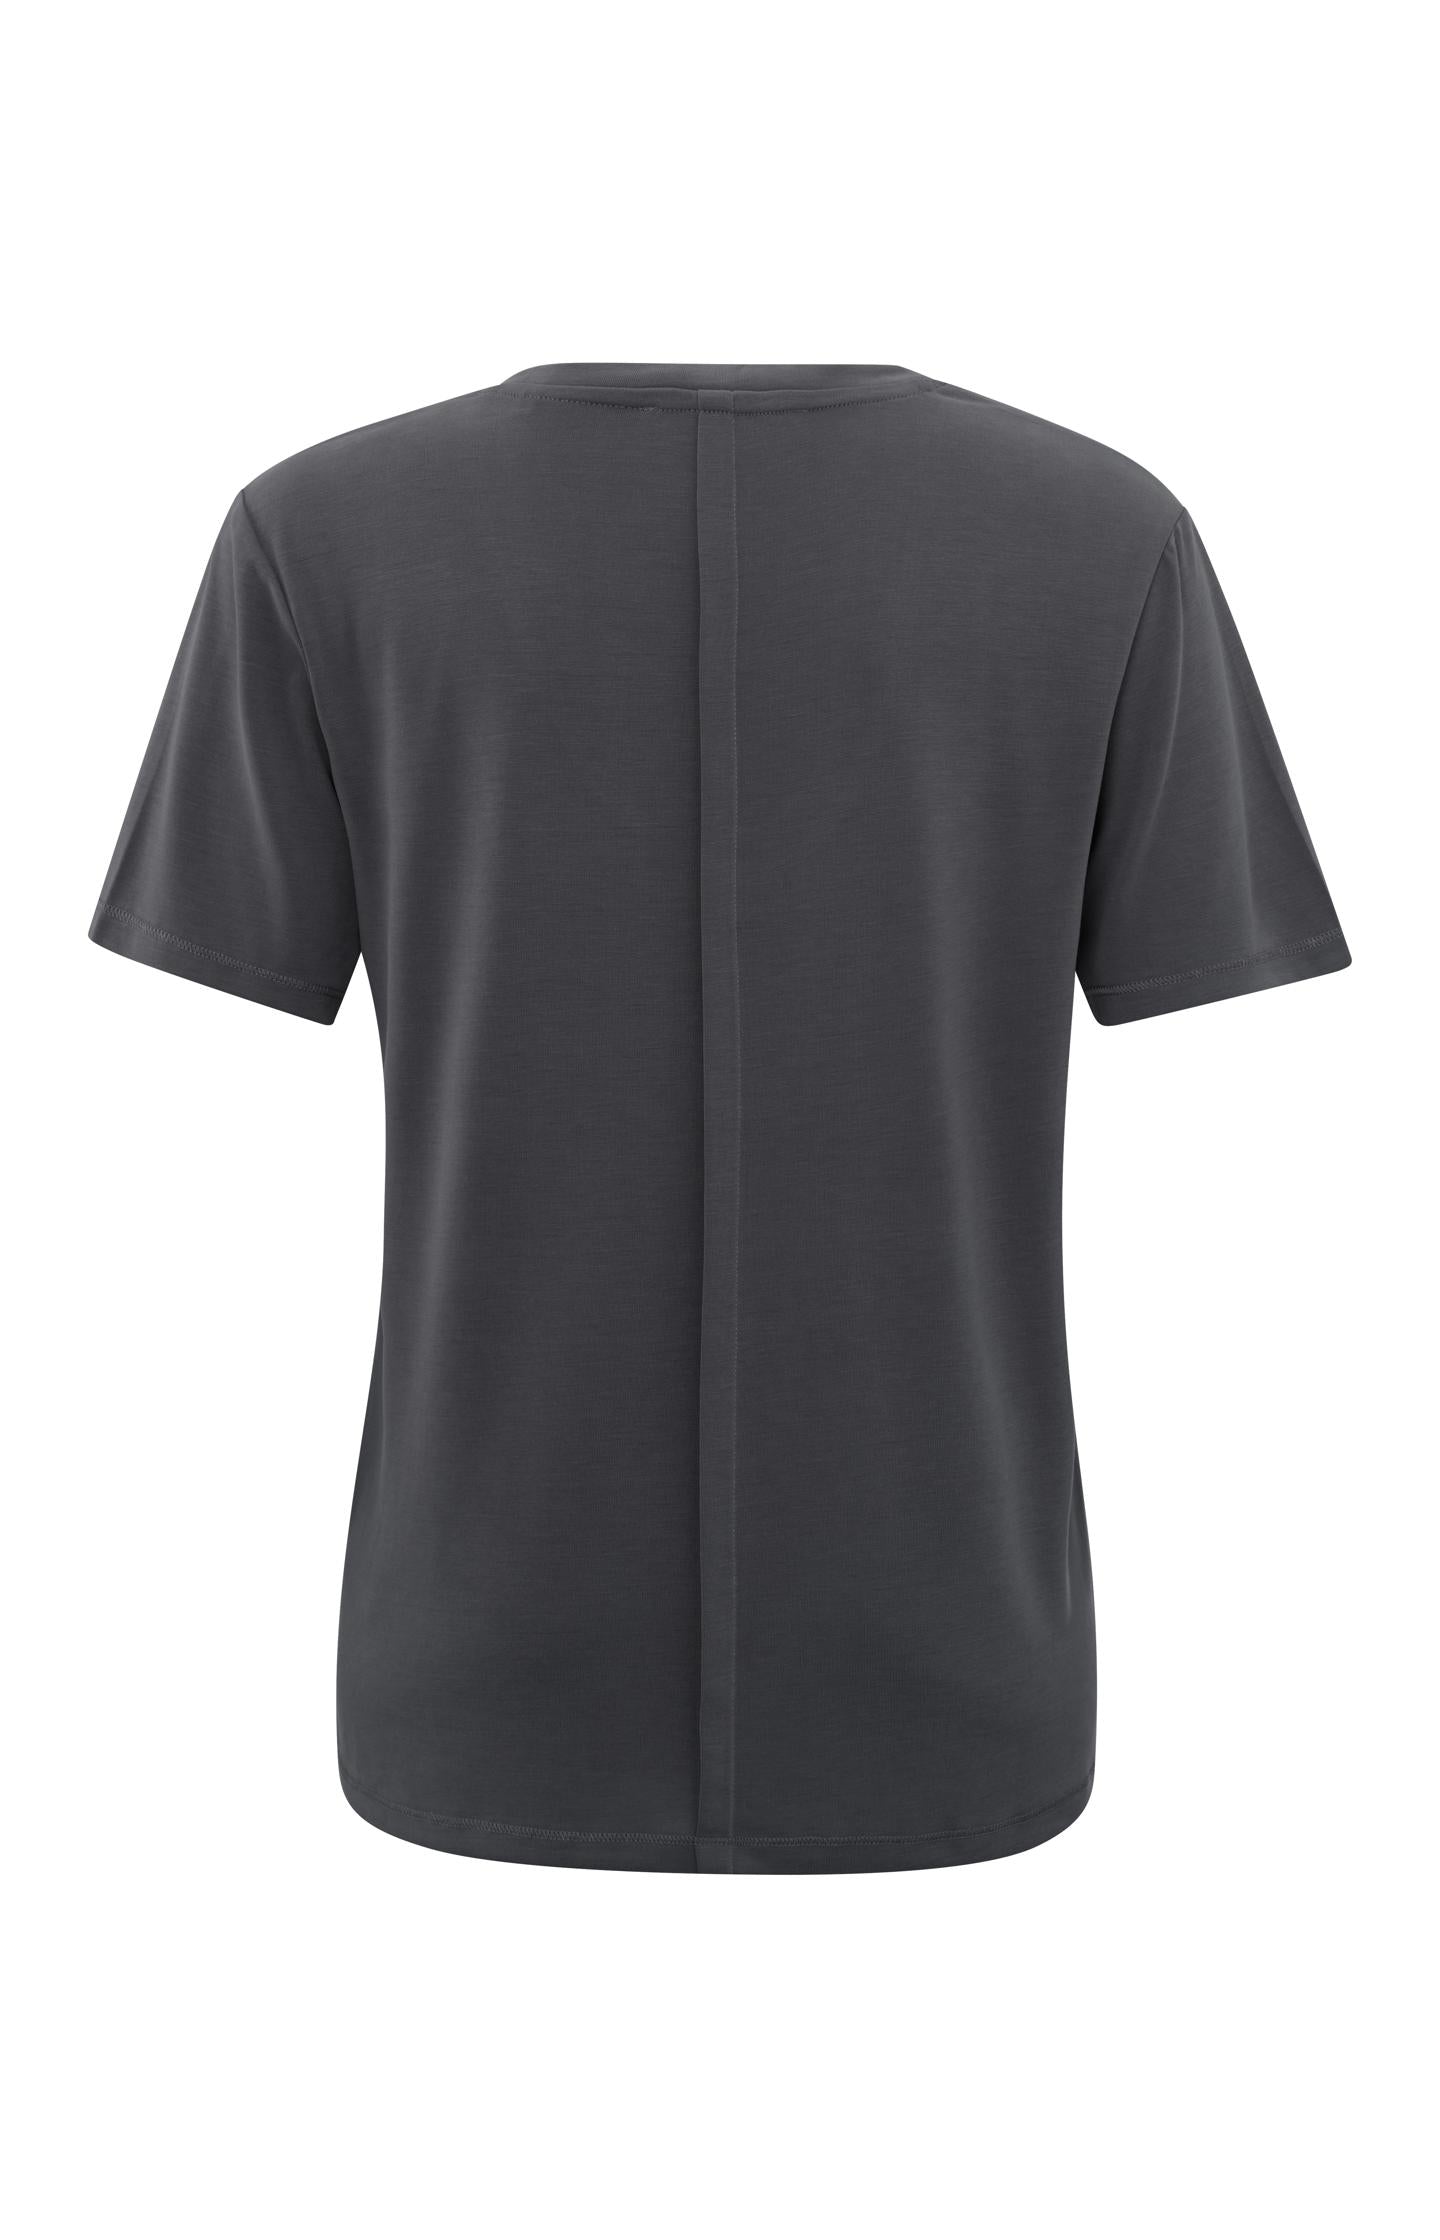 T-shirt with round V-neck and short sleeves in regular fit